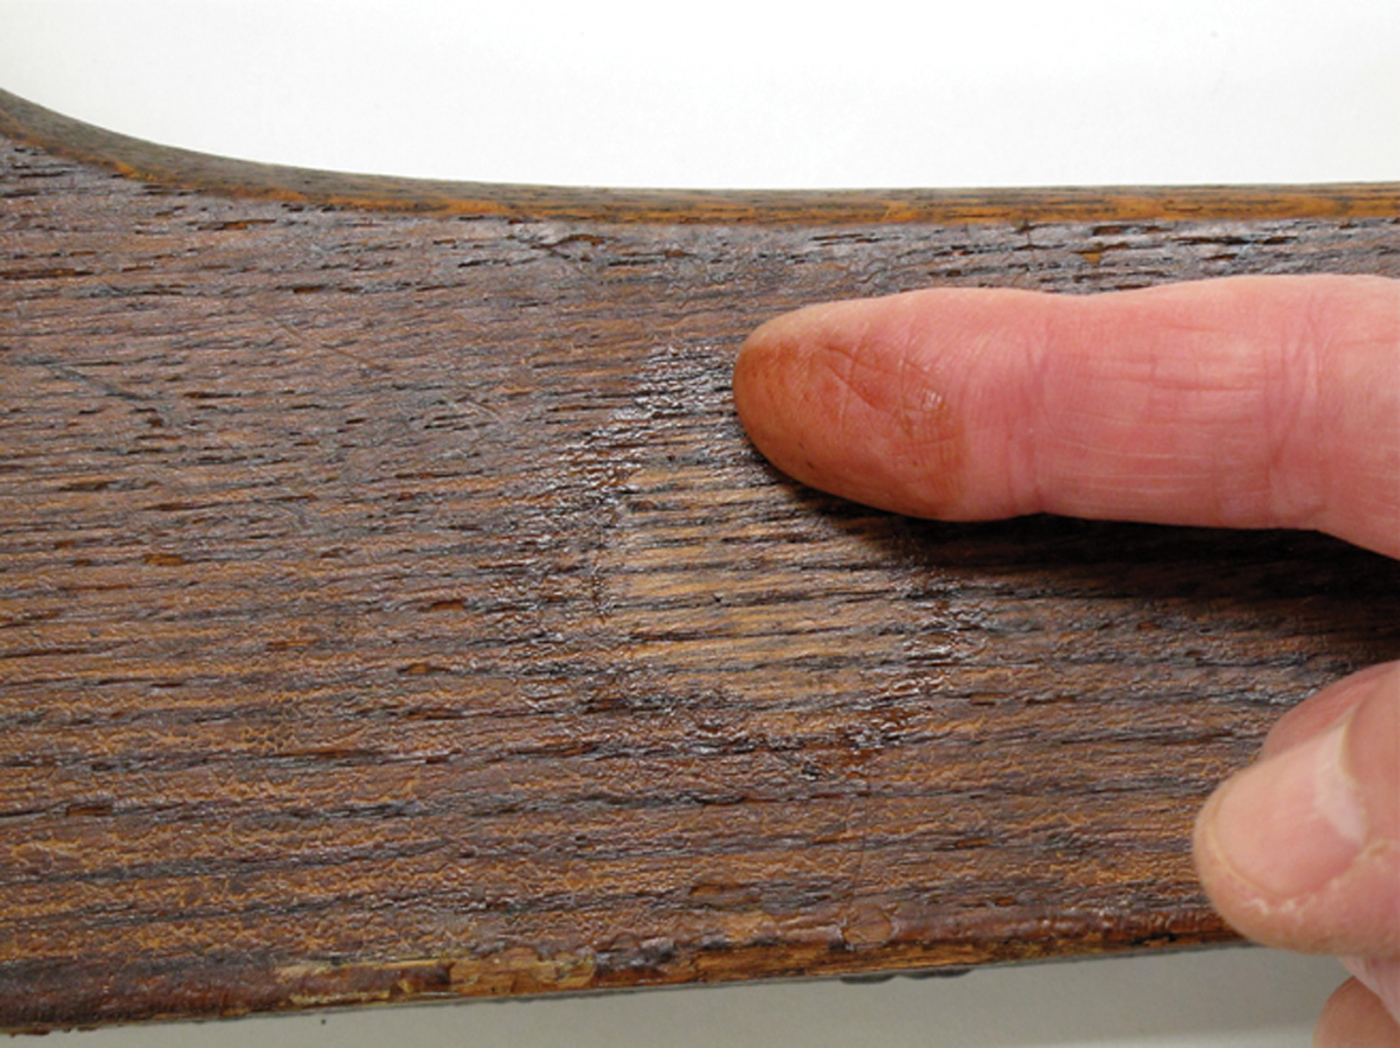 When Is Okay to Repair and Refinish Antique Furniture?